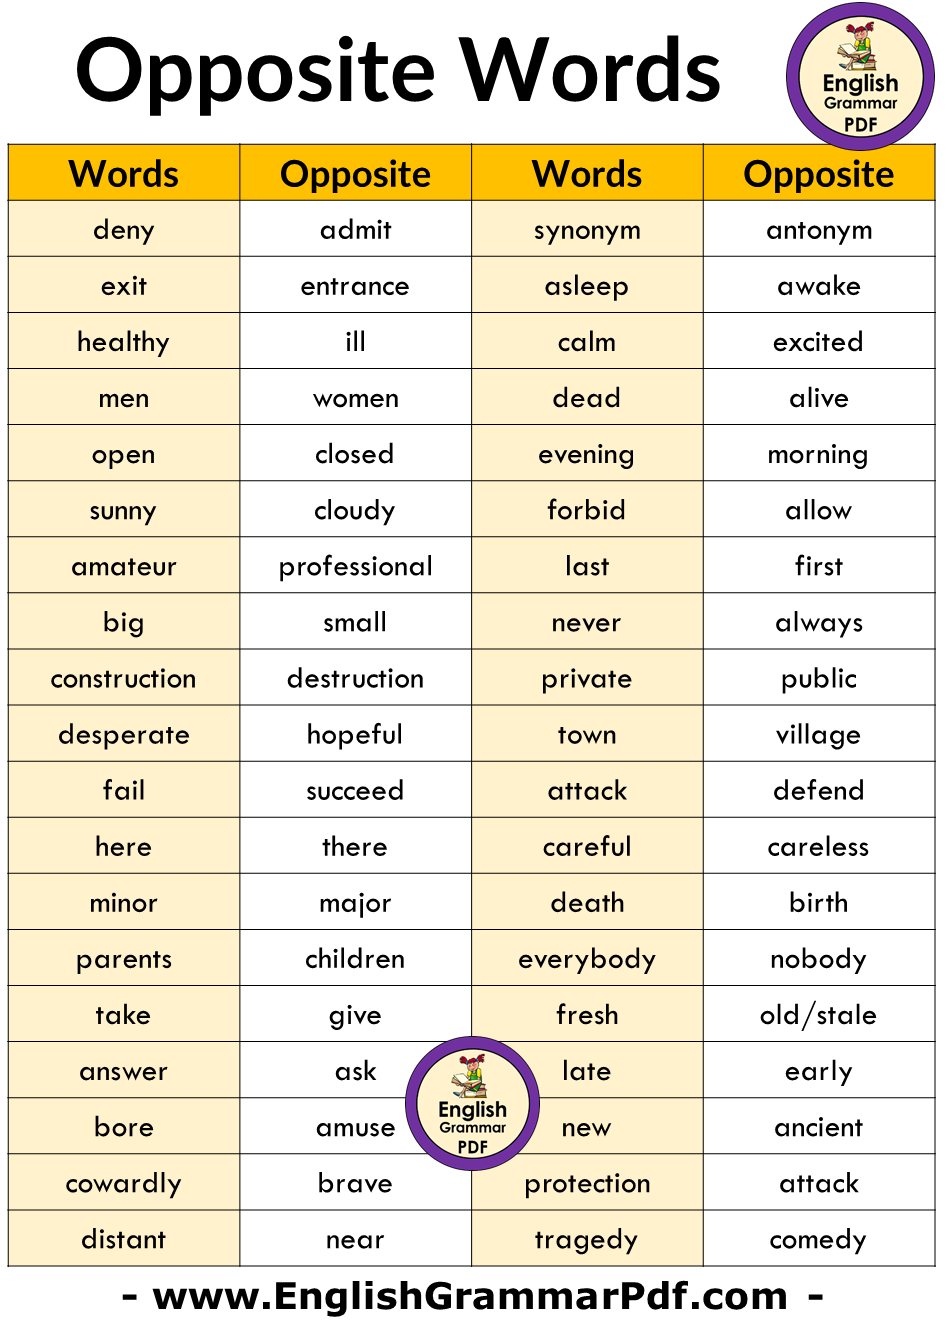 Opposite Words List in English